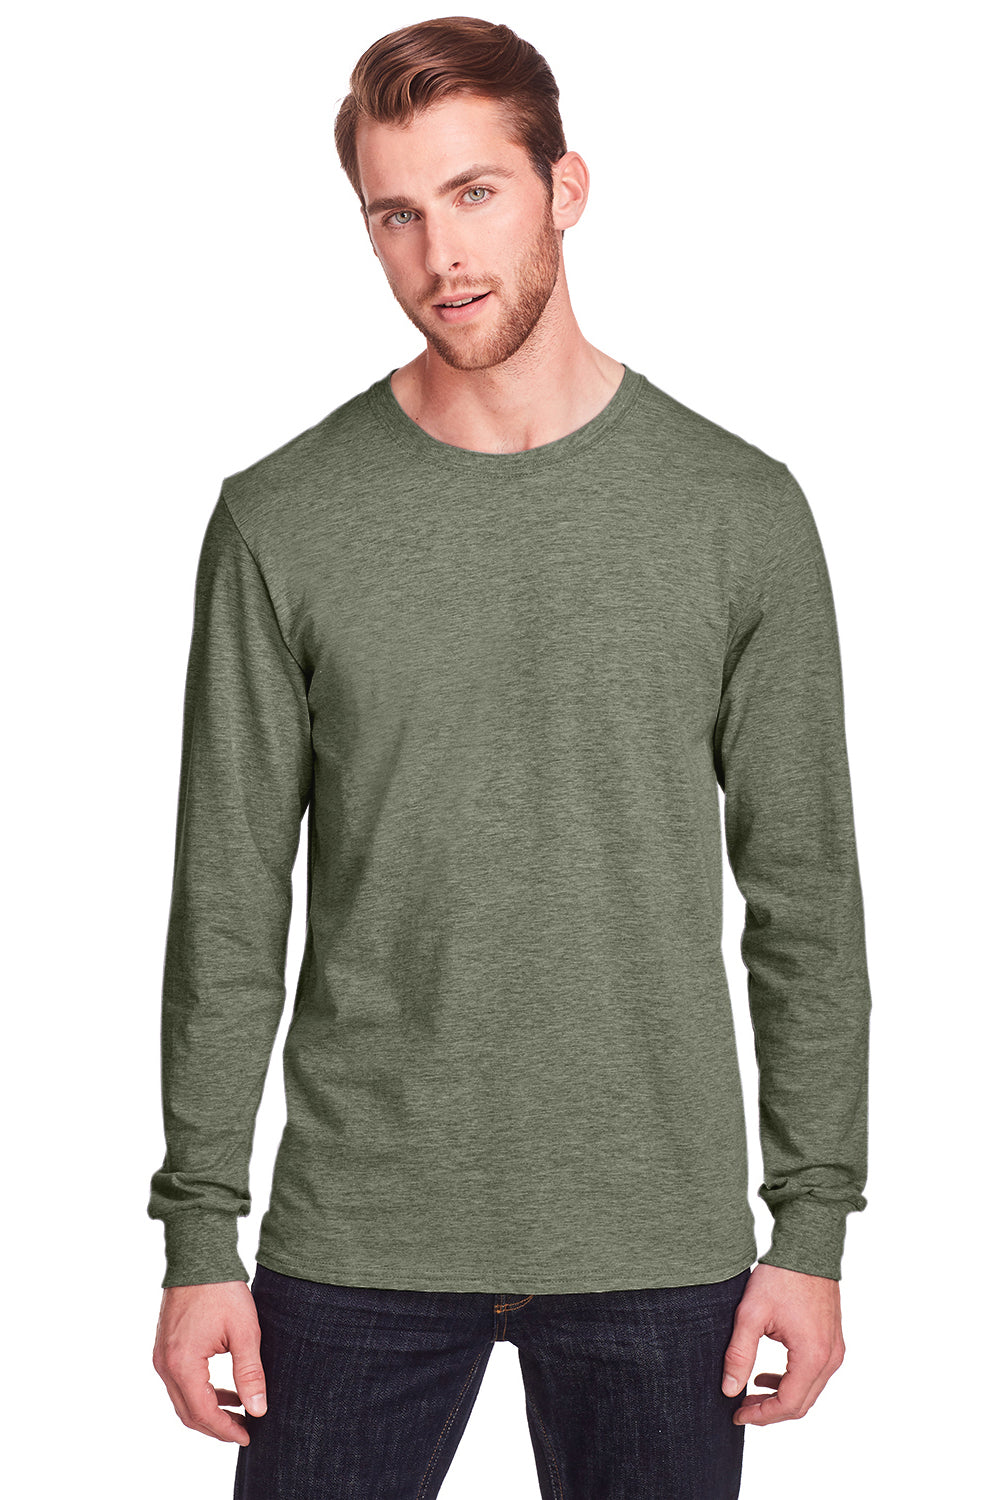 Fruit Of The Loom IC47LSR Mens Iconic Long Sleeve Crewneck T-Shirt Heather Military Green Front